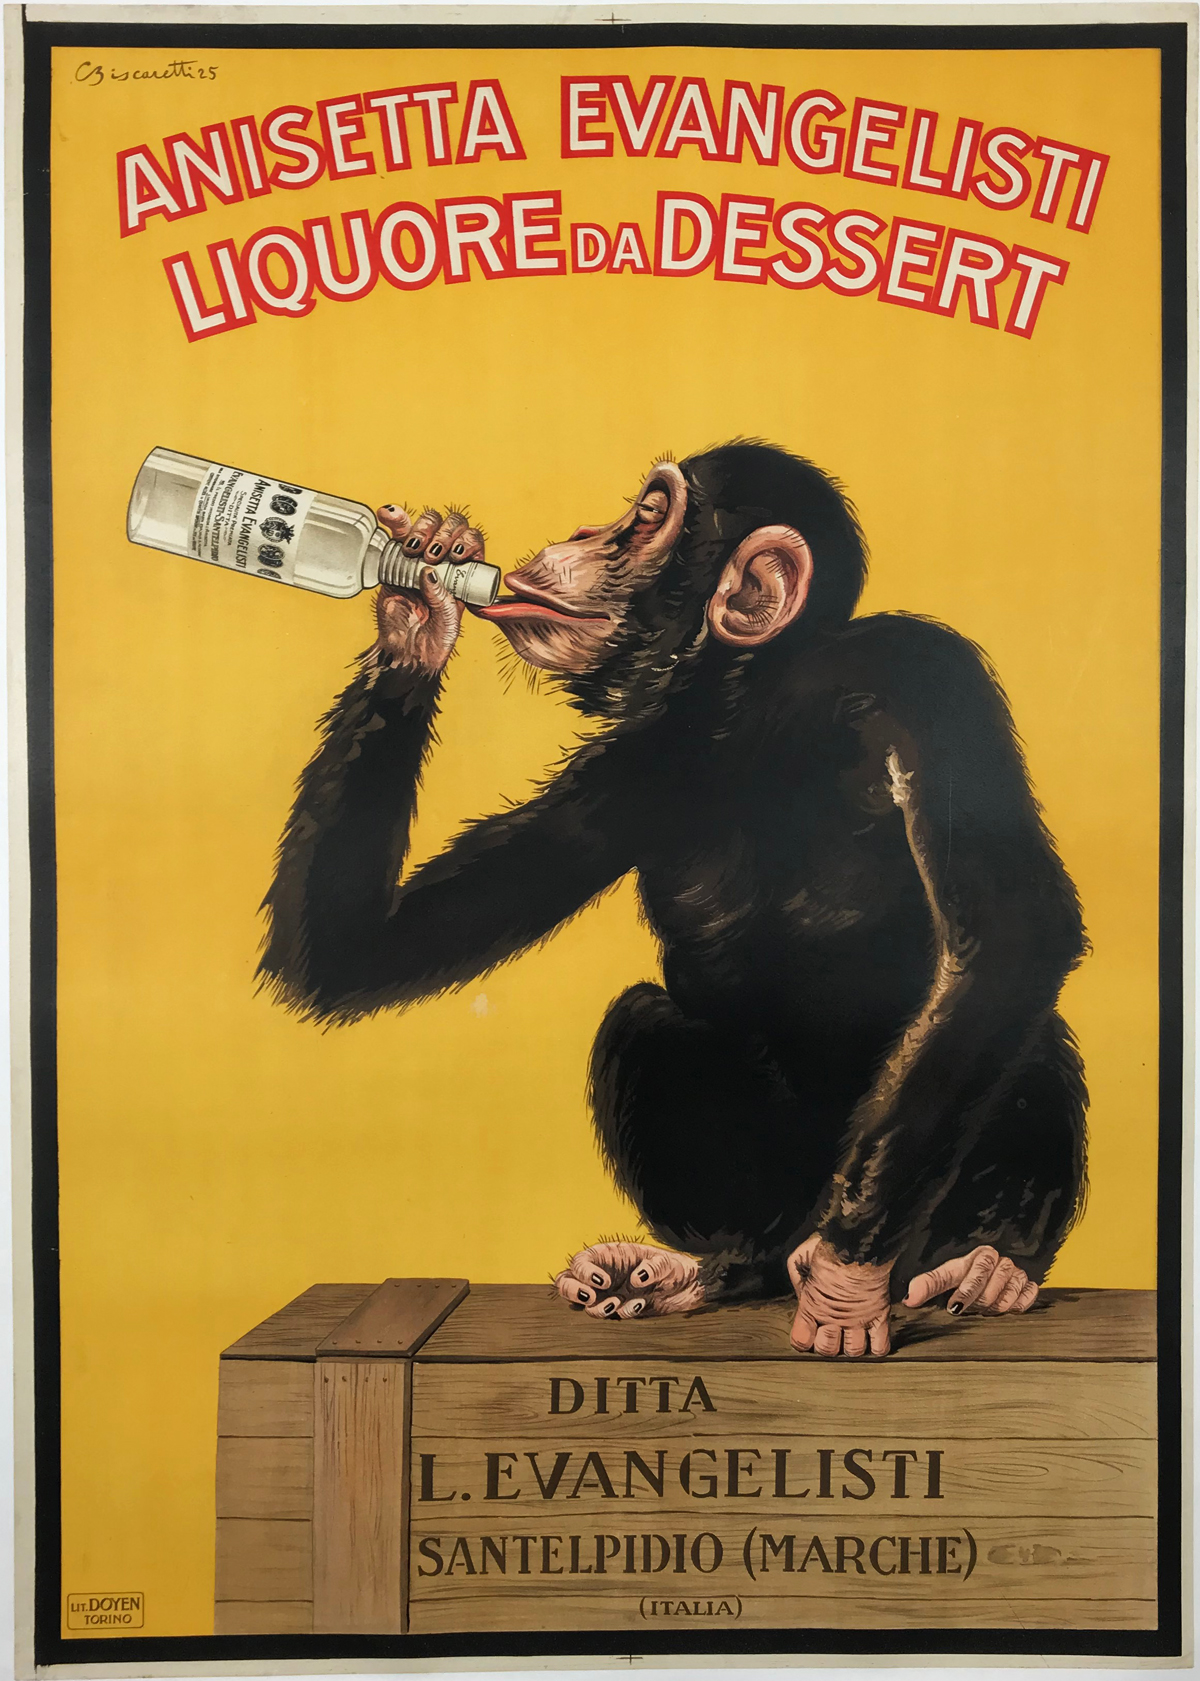 Anisetta Evangelisti drunk monkey original vintage poster from 1925 by Biscaretti. Italian wine and spirits poster features a monkey on a crate drinking from a bottle on a yellow background.